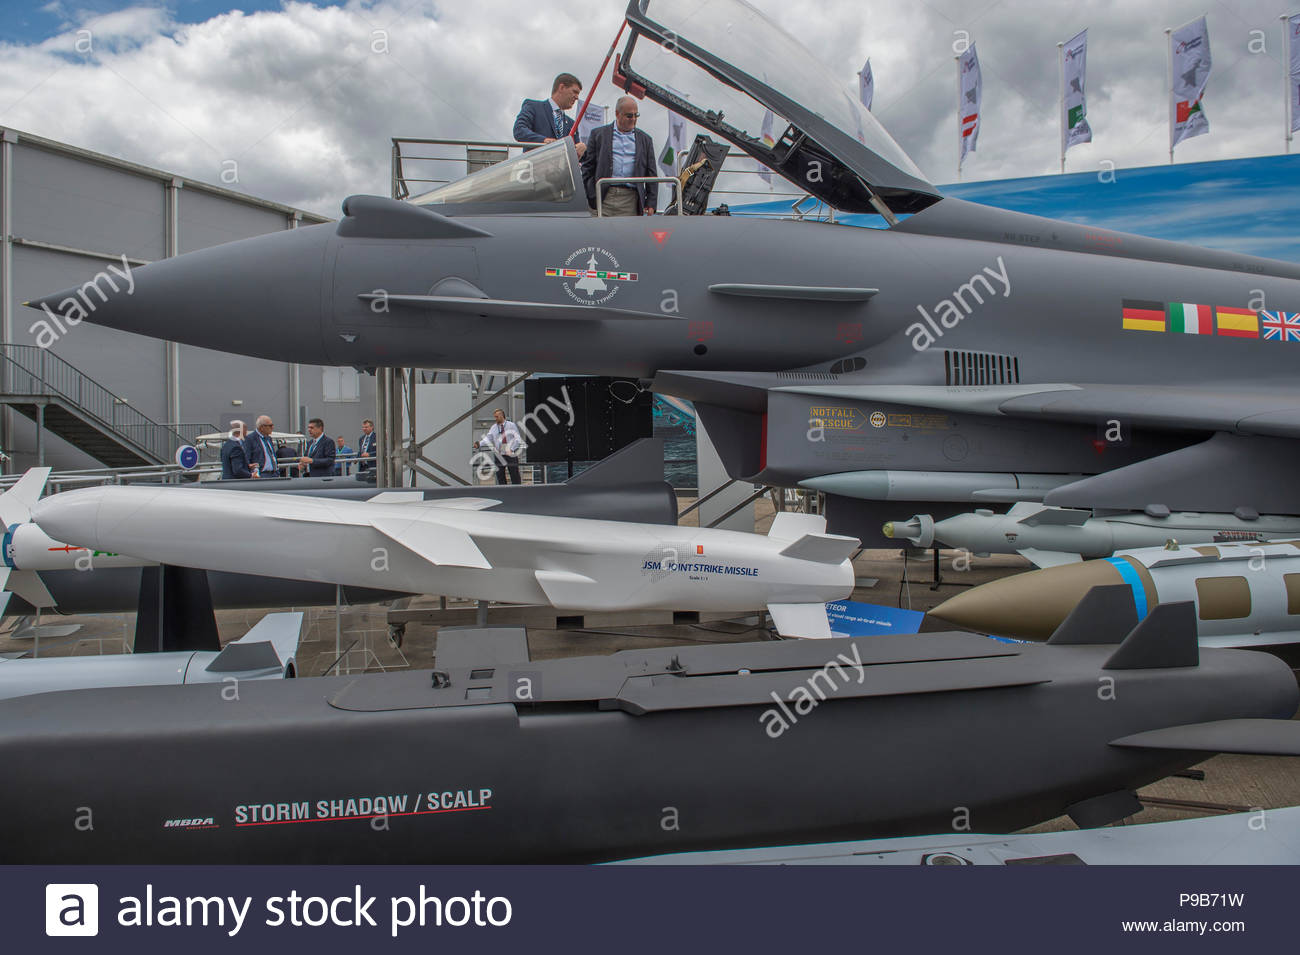 farnborough-hampshire-uk-17-july-2018-busy-second-day-of-the-biennial-farnborough-international-trade-airshow-fia2018-open-to-aerospace-and-defence-buyers-and-sellers-credit-malcolm-parkalamy-live-news-P9B71W.jpg